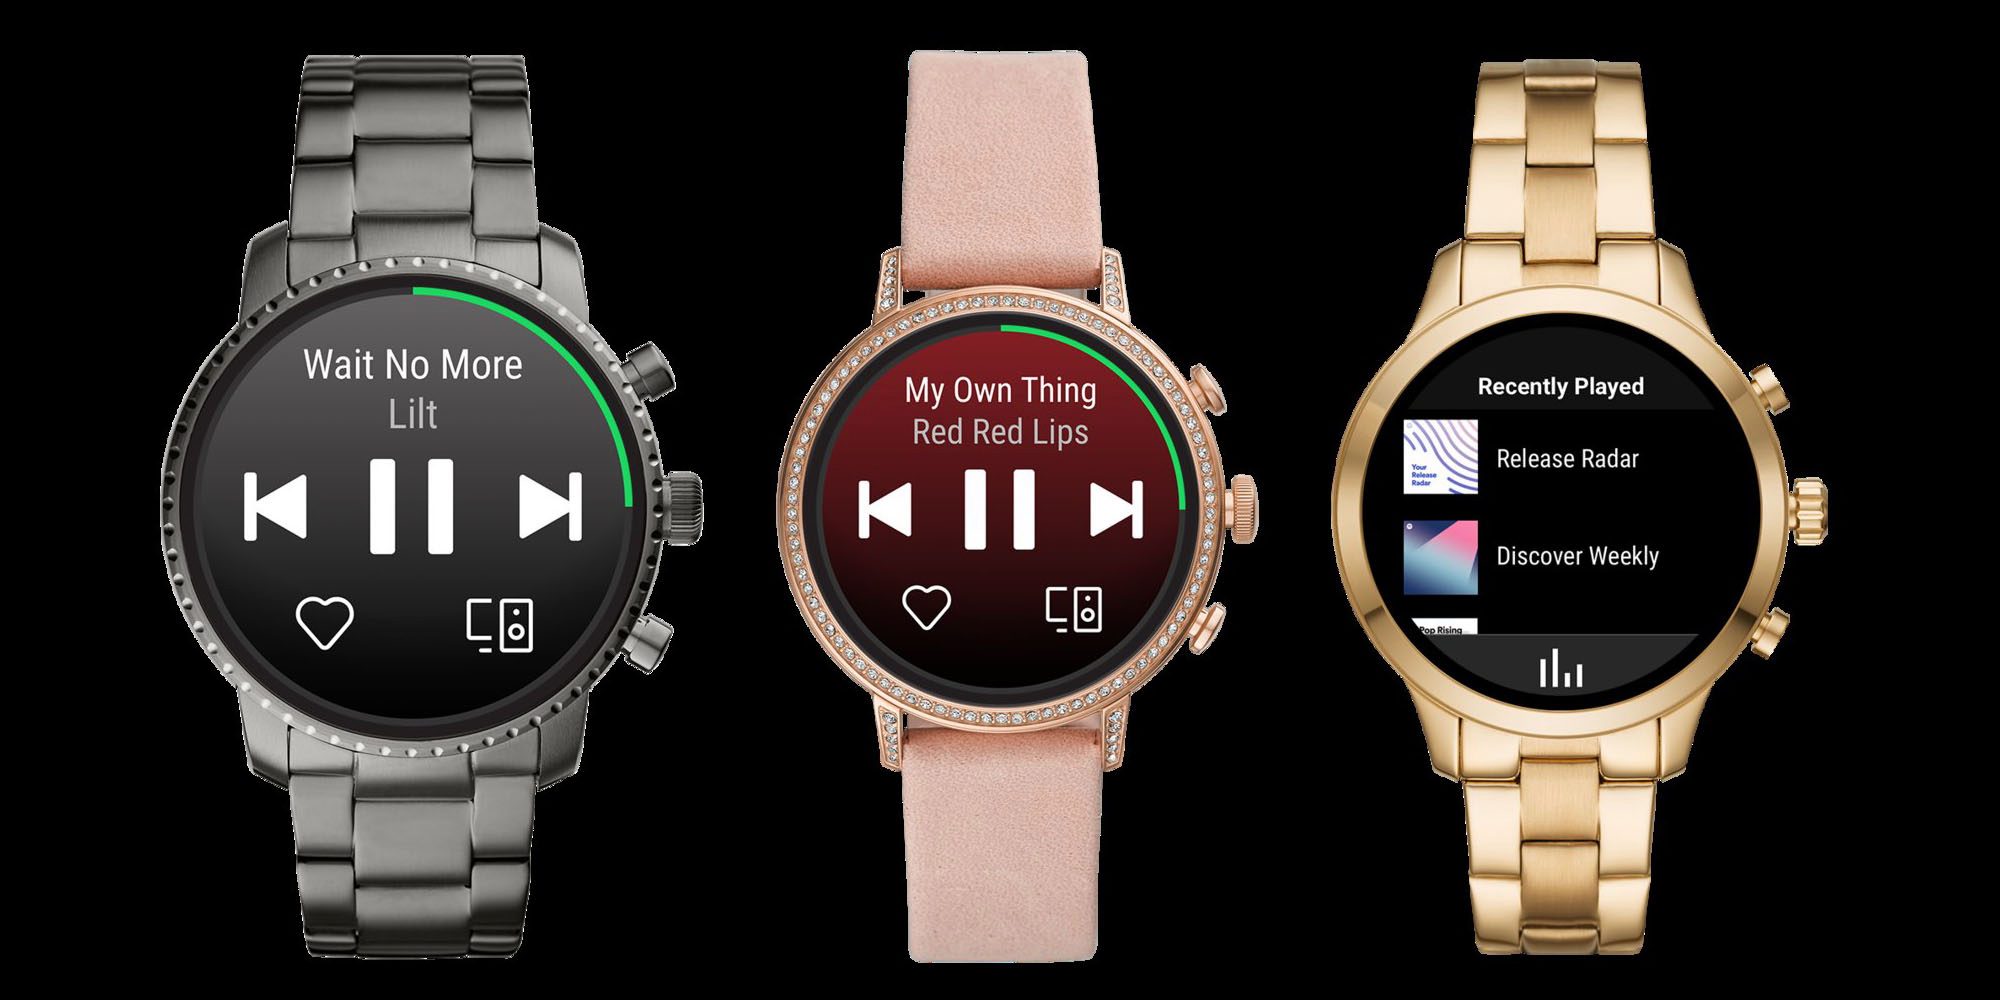 Spotify says adding offline playback to its Wear OS app is ‘virtually impossible’